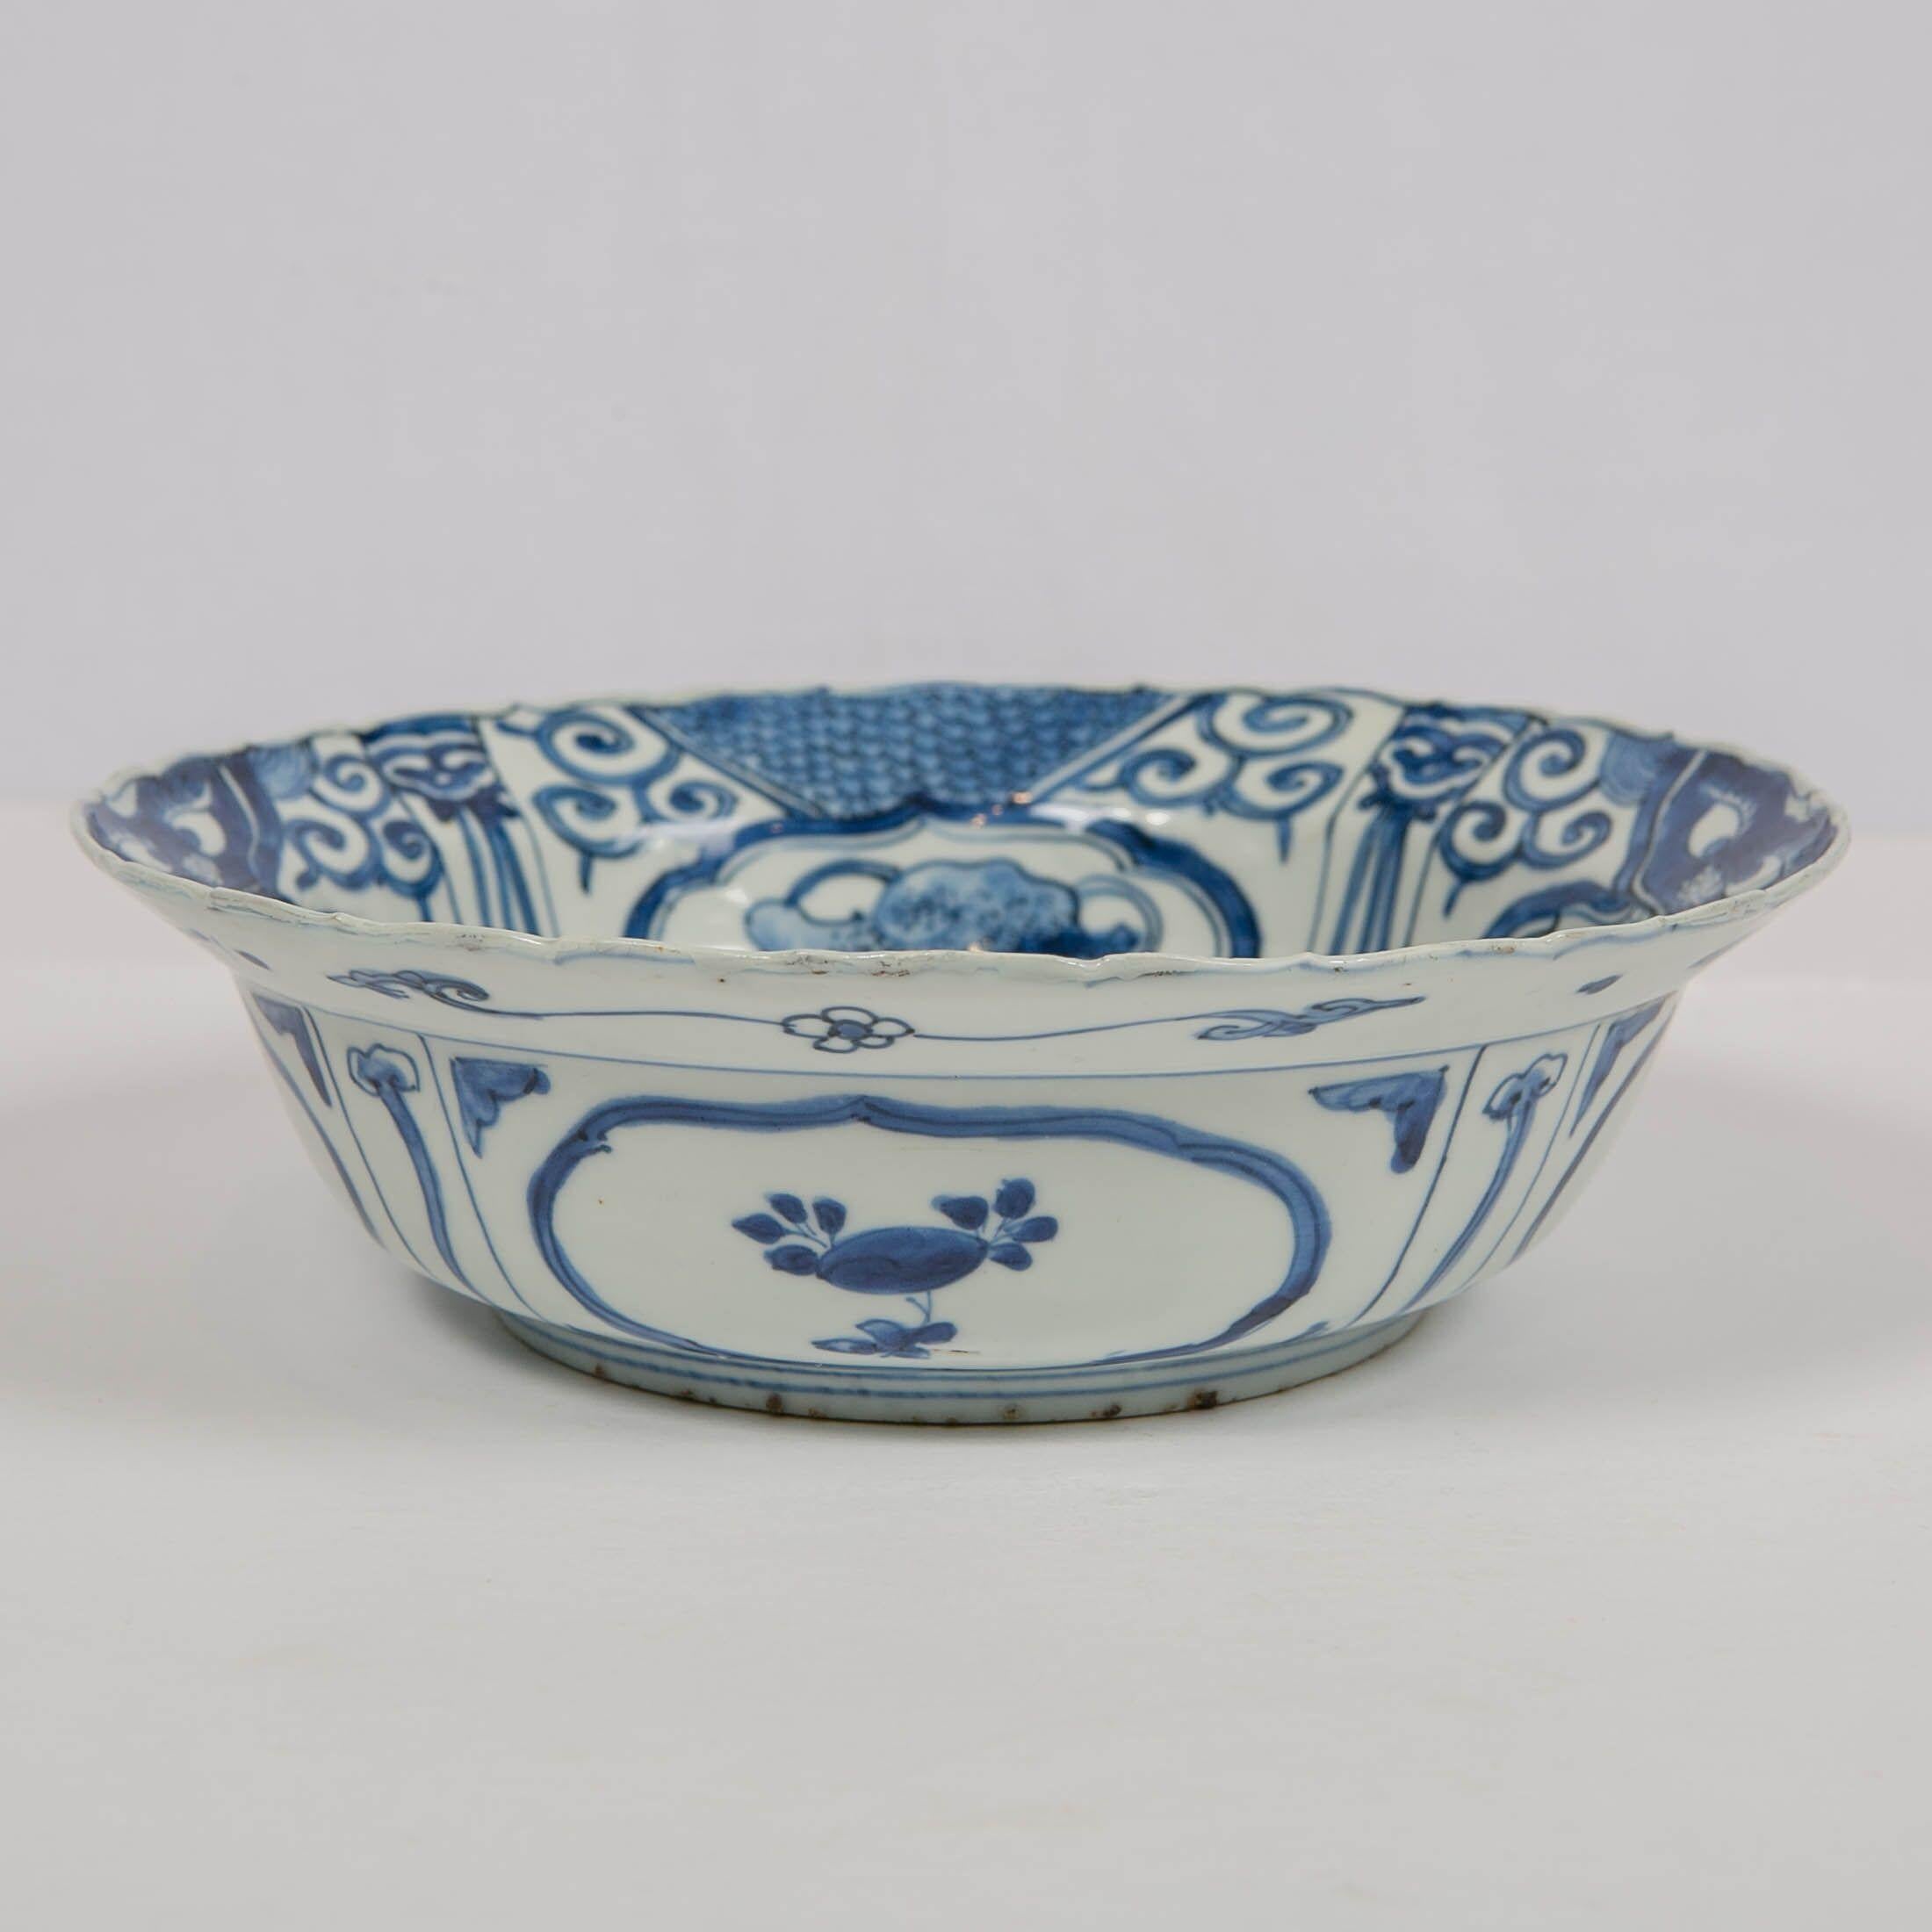 Chinese Blue and White Klapmuts Bowl Made in Reign of Chongzhen Emperor 1